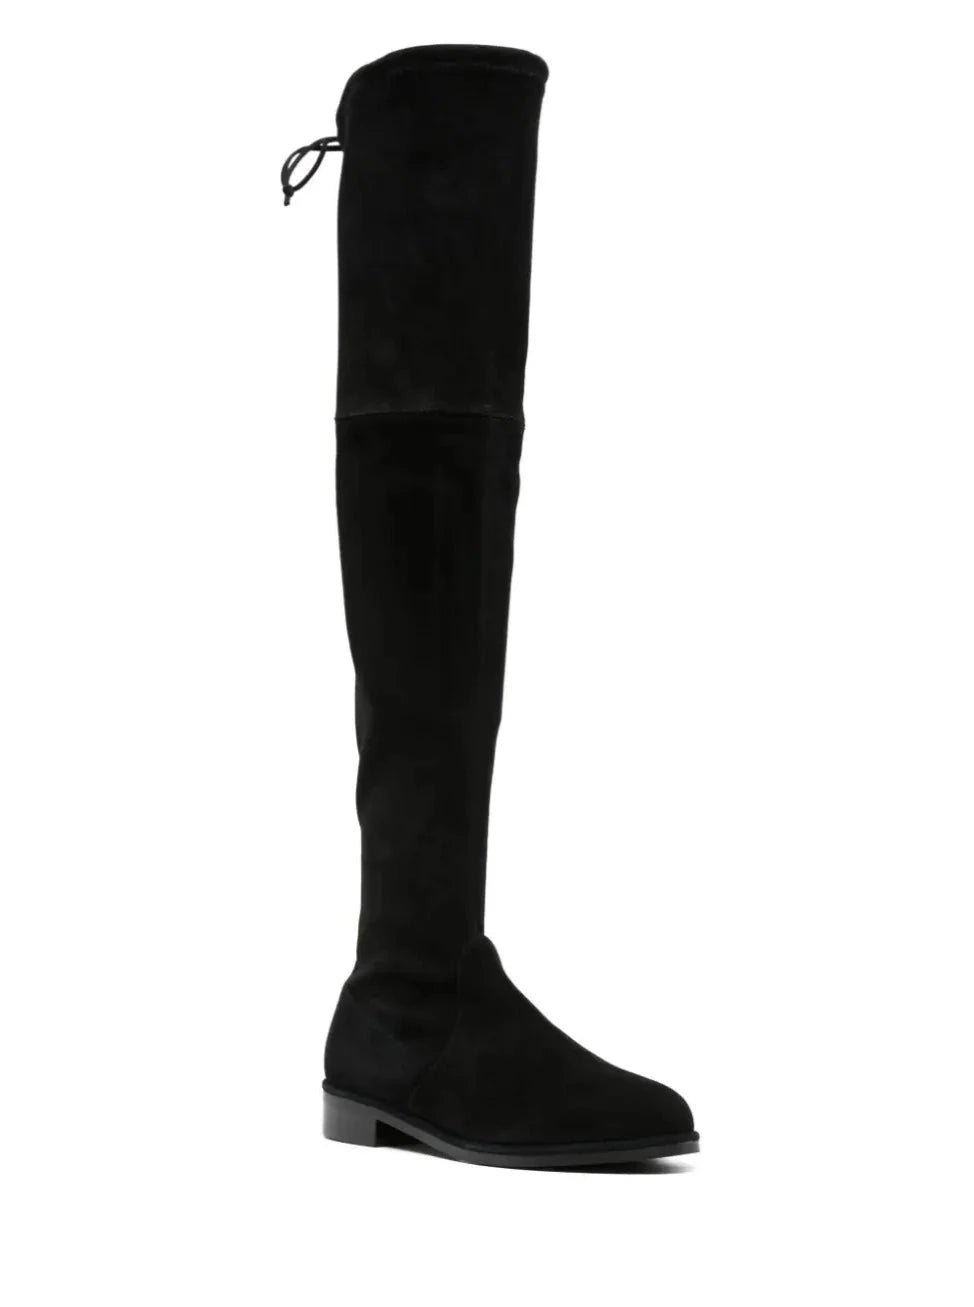 LOWLAND bold suede thigh-high boot, black